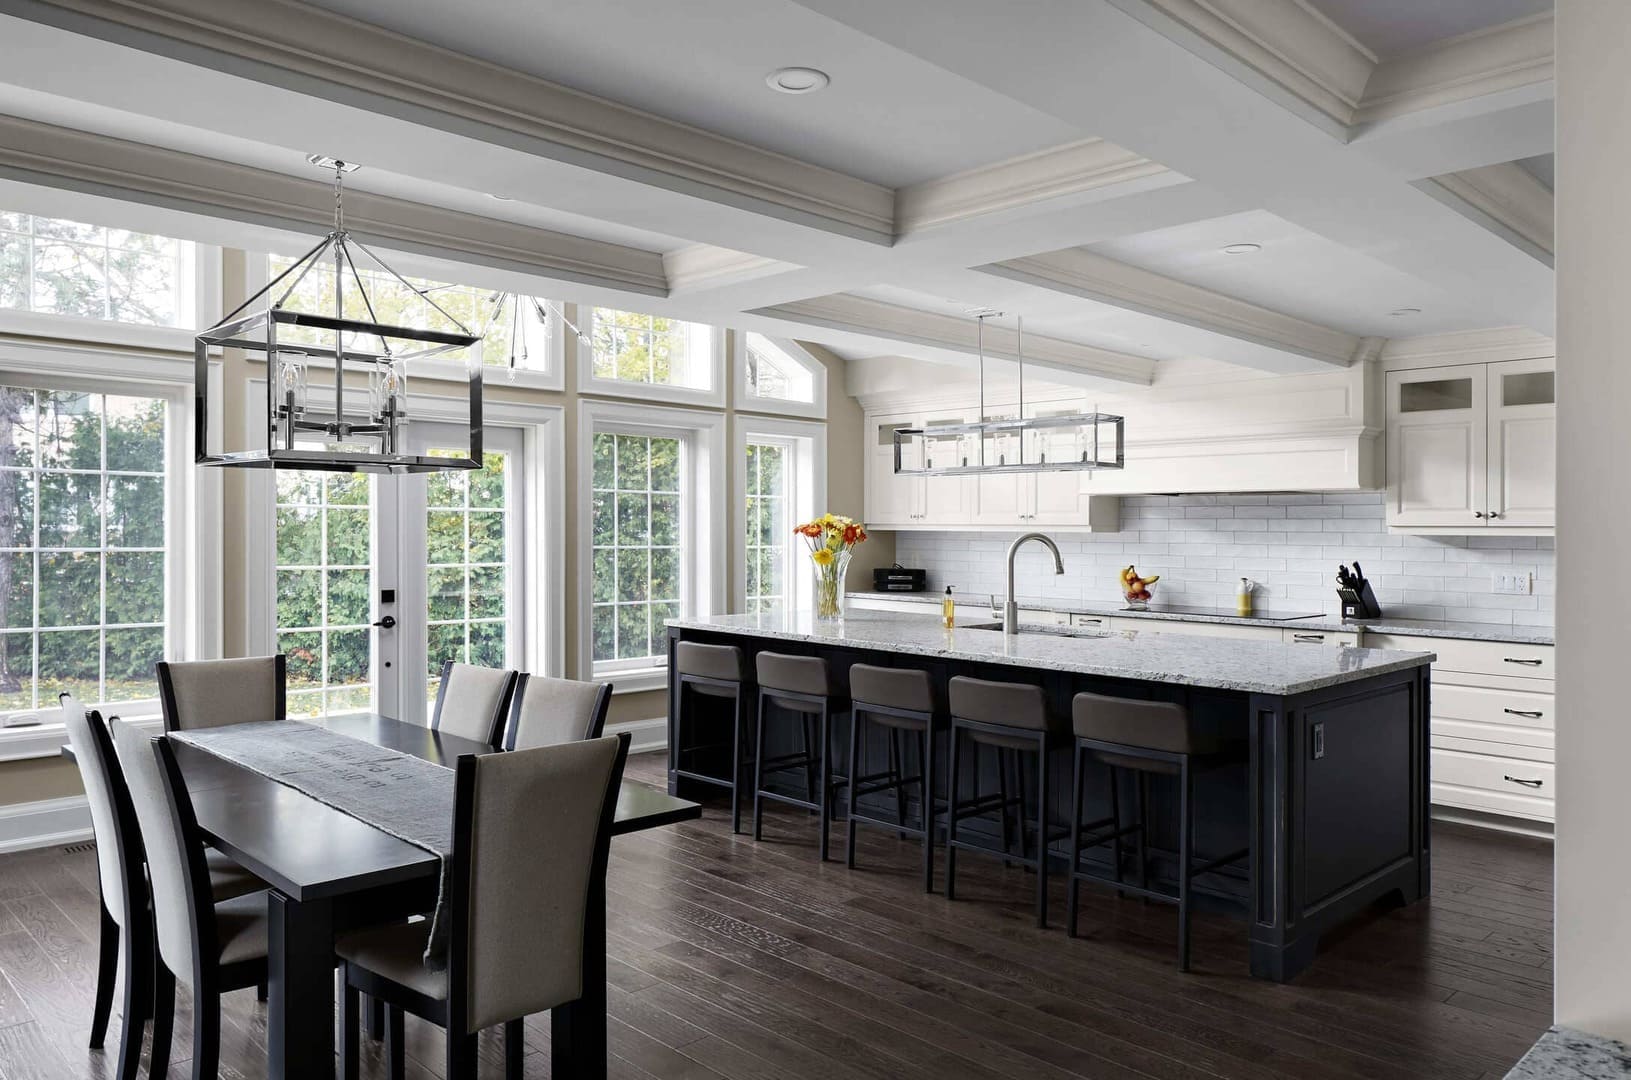 Open-Concept Kitchen Renovation With Island and Seating and Hanging Light Fixtures